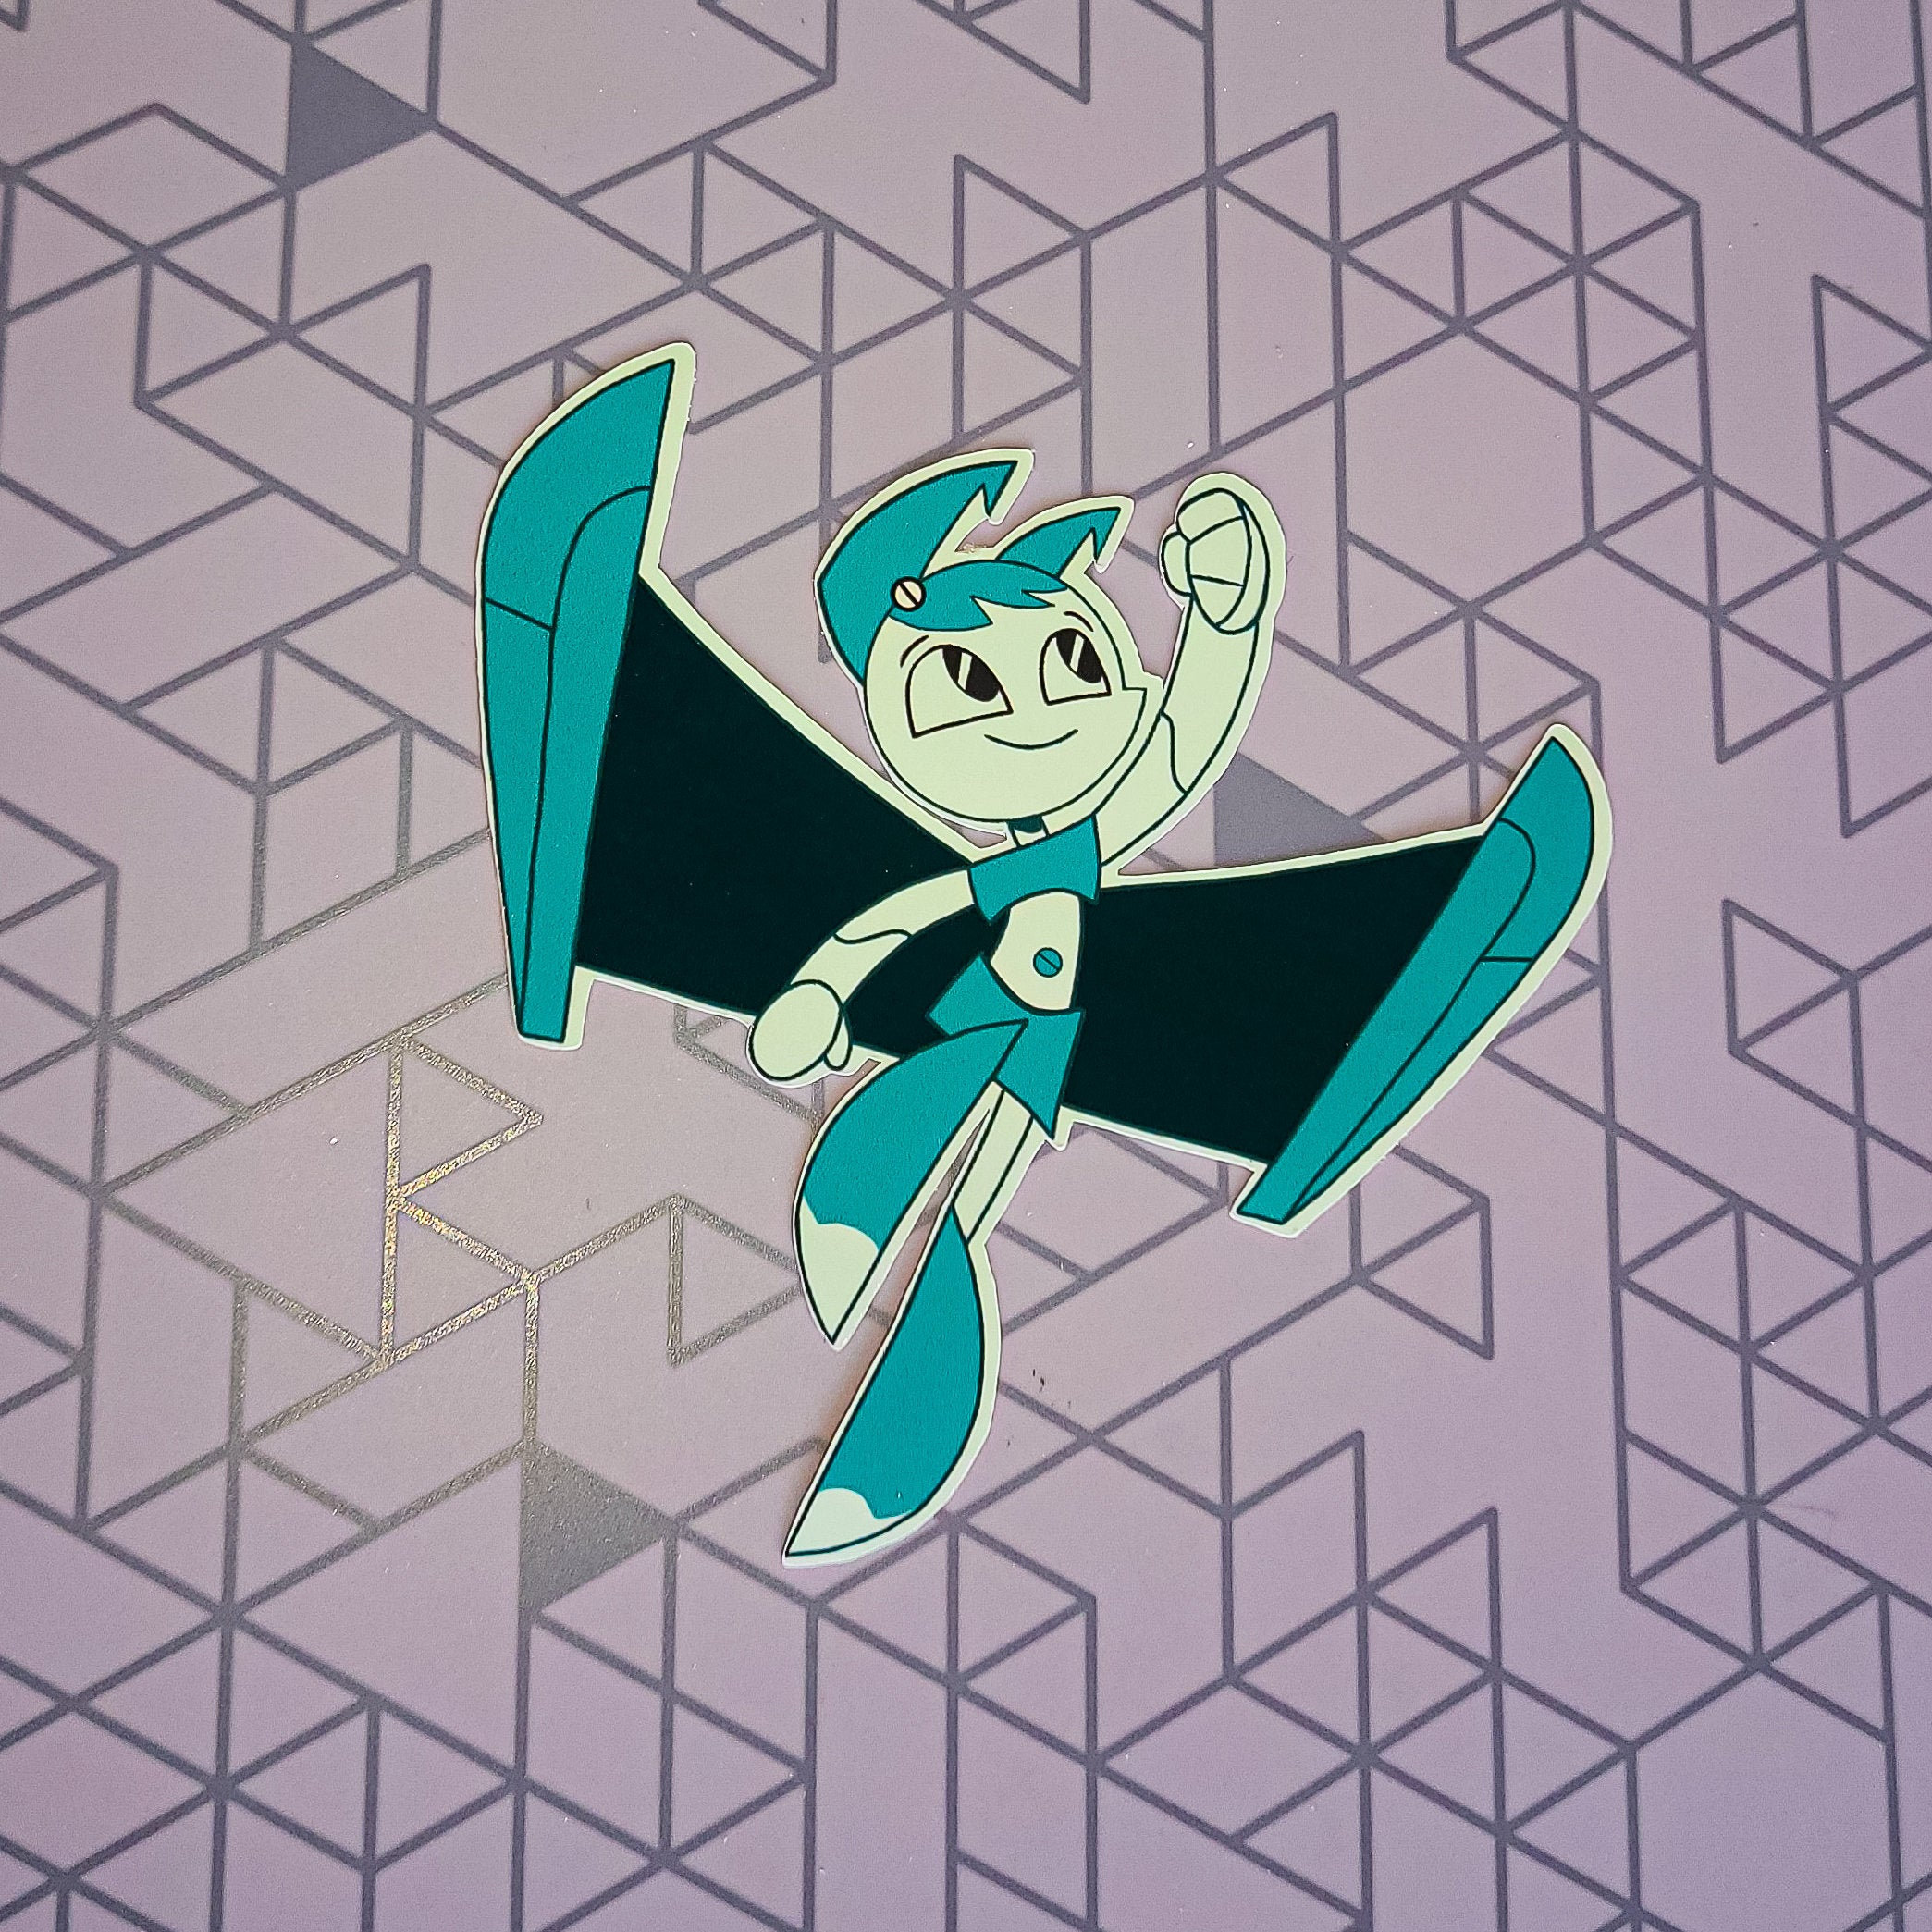 Xj9 designs, themes, templates and downloadable graphic elements